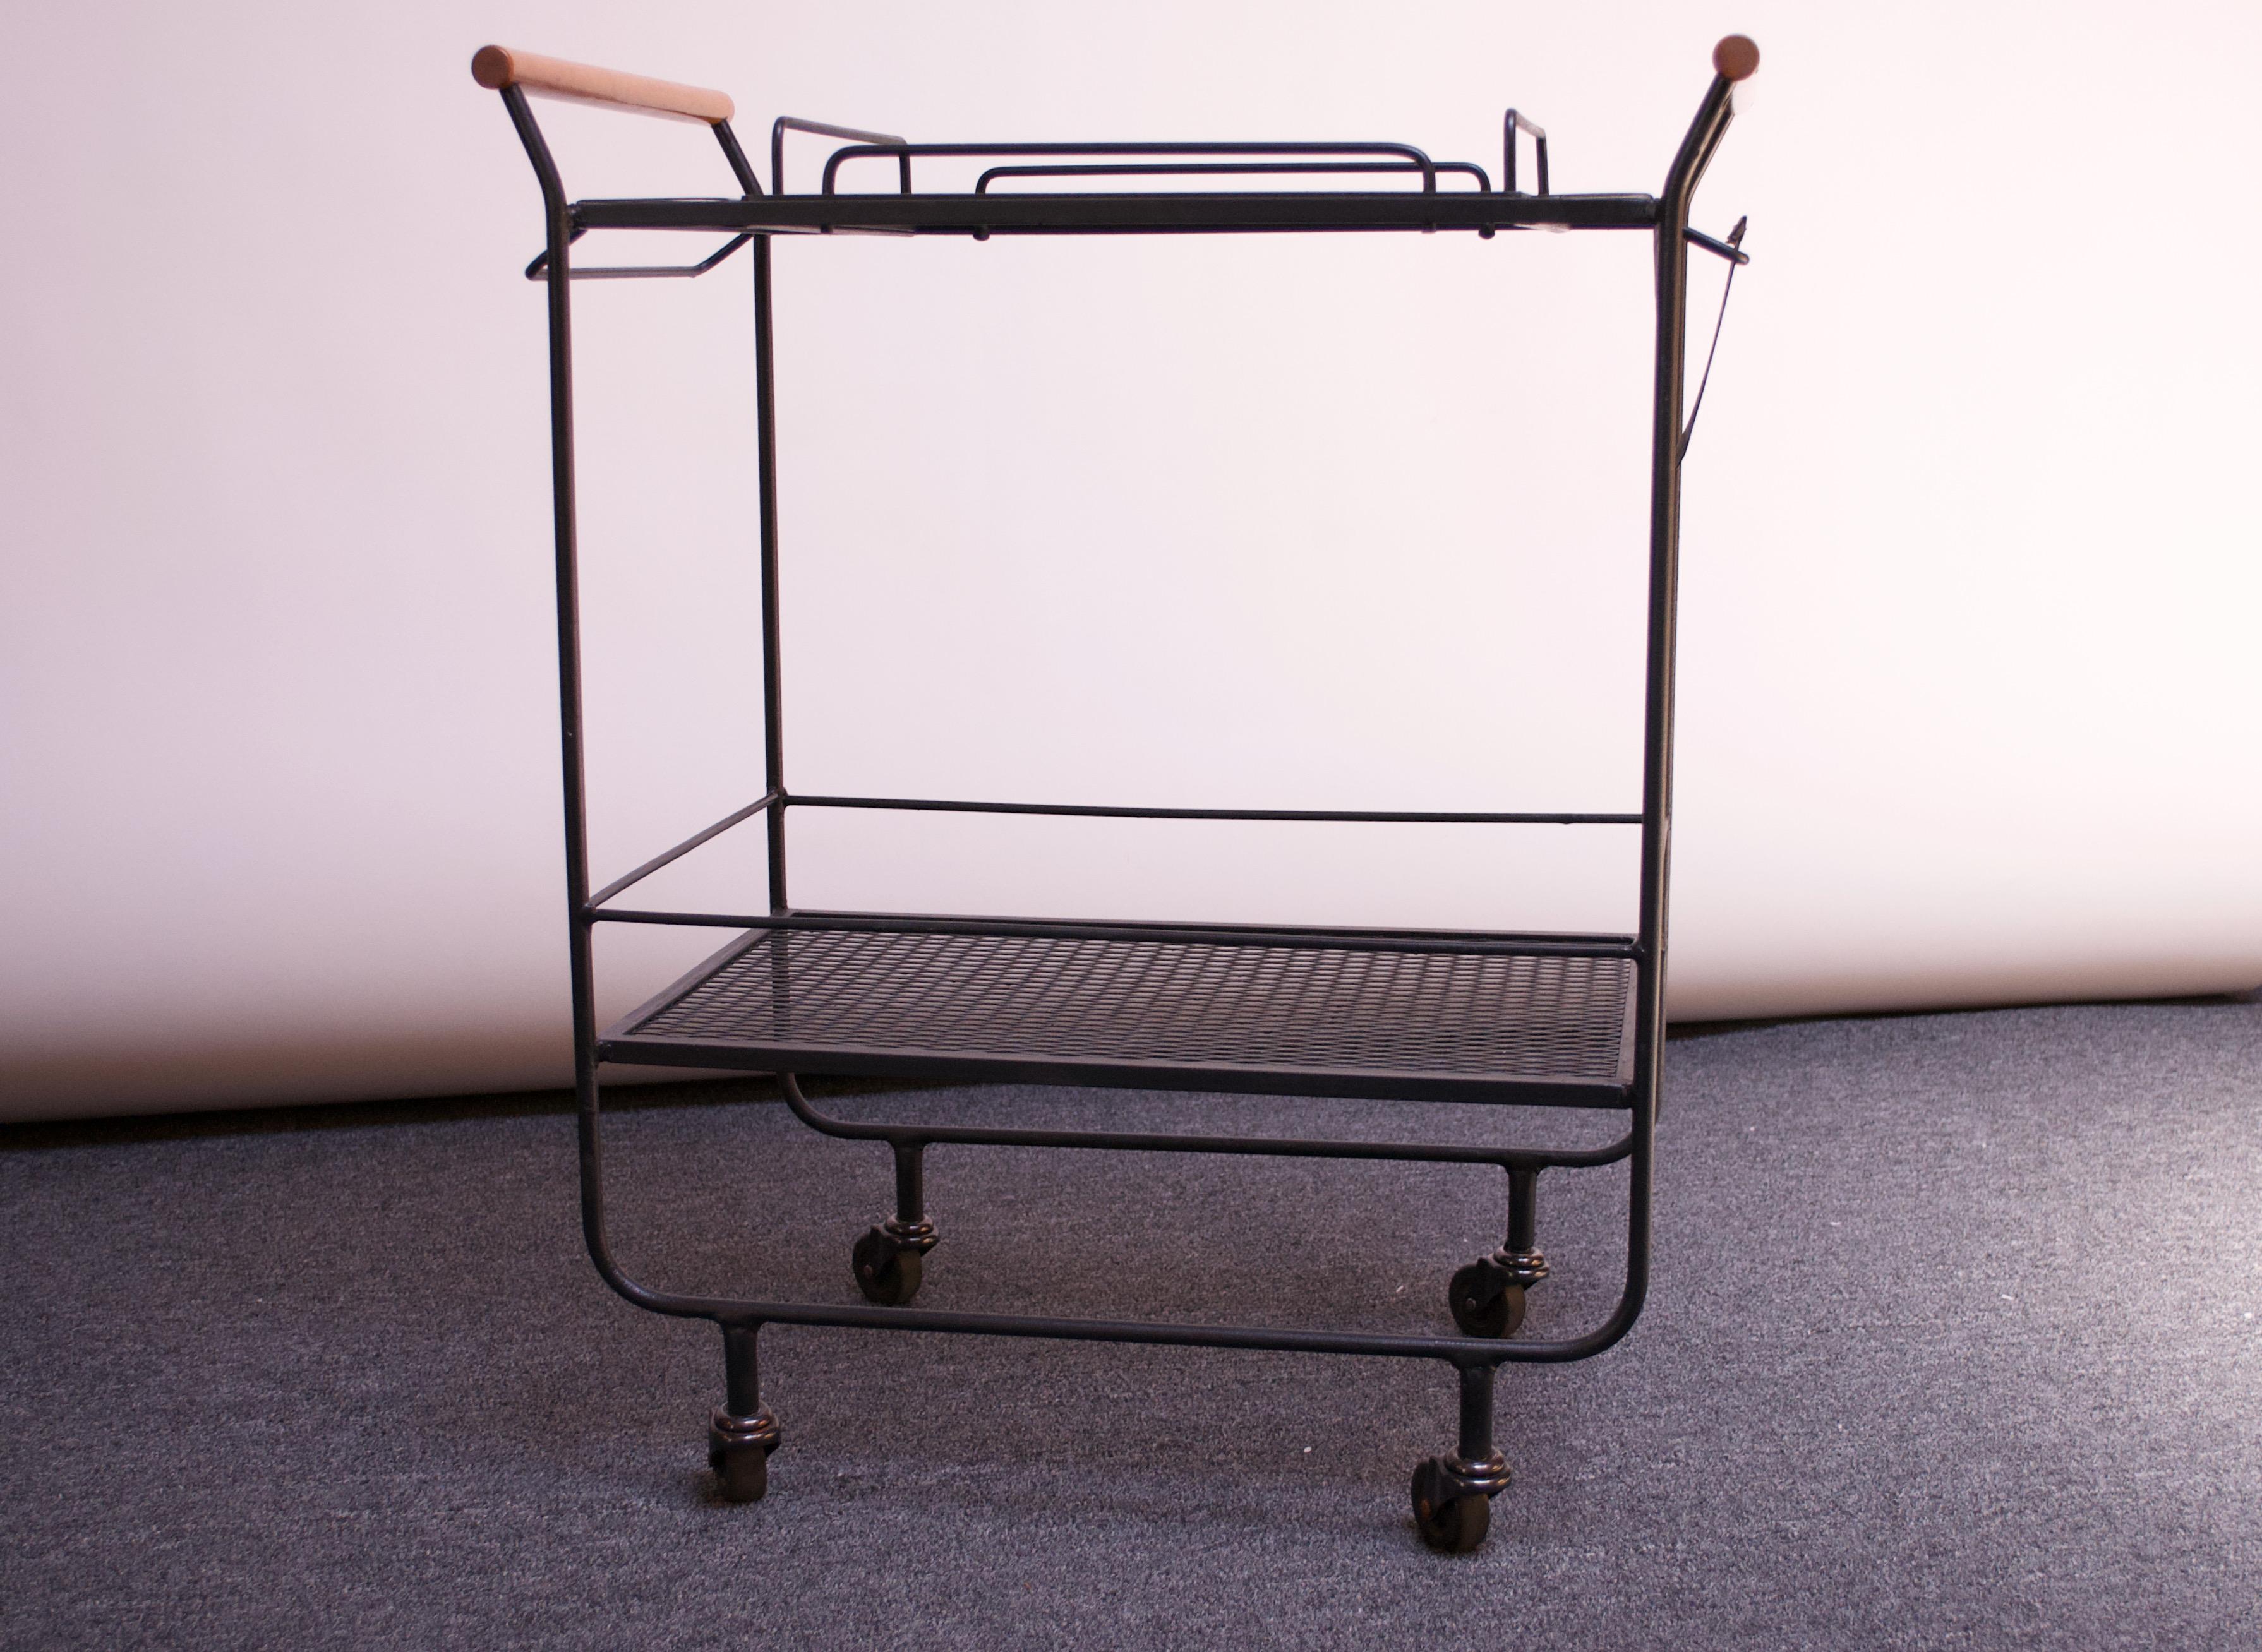 Minimal, modernist bar cart / tea trolley featuring two perforated iron surfaces with four larger glass holders on one side, and six on the other (given the age of production, these holders were likely intended for tapered high balls and champagne